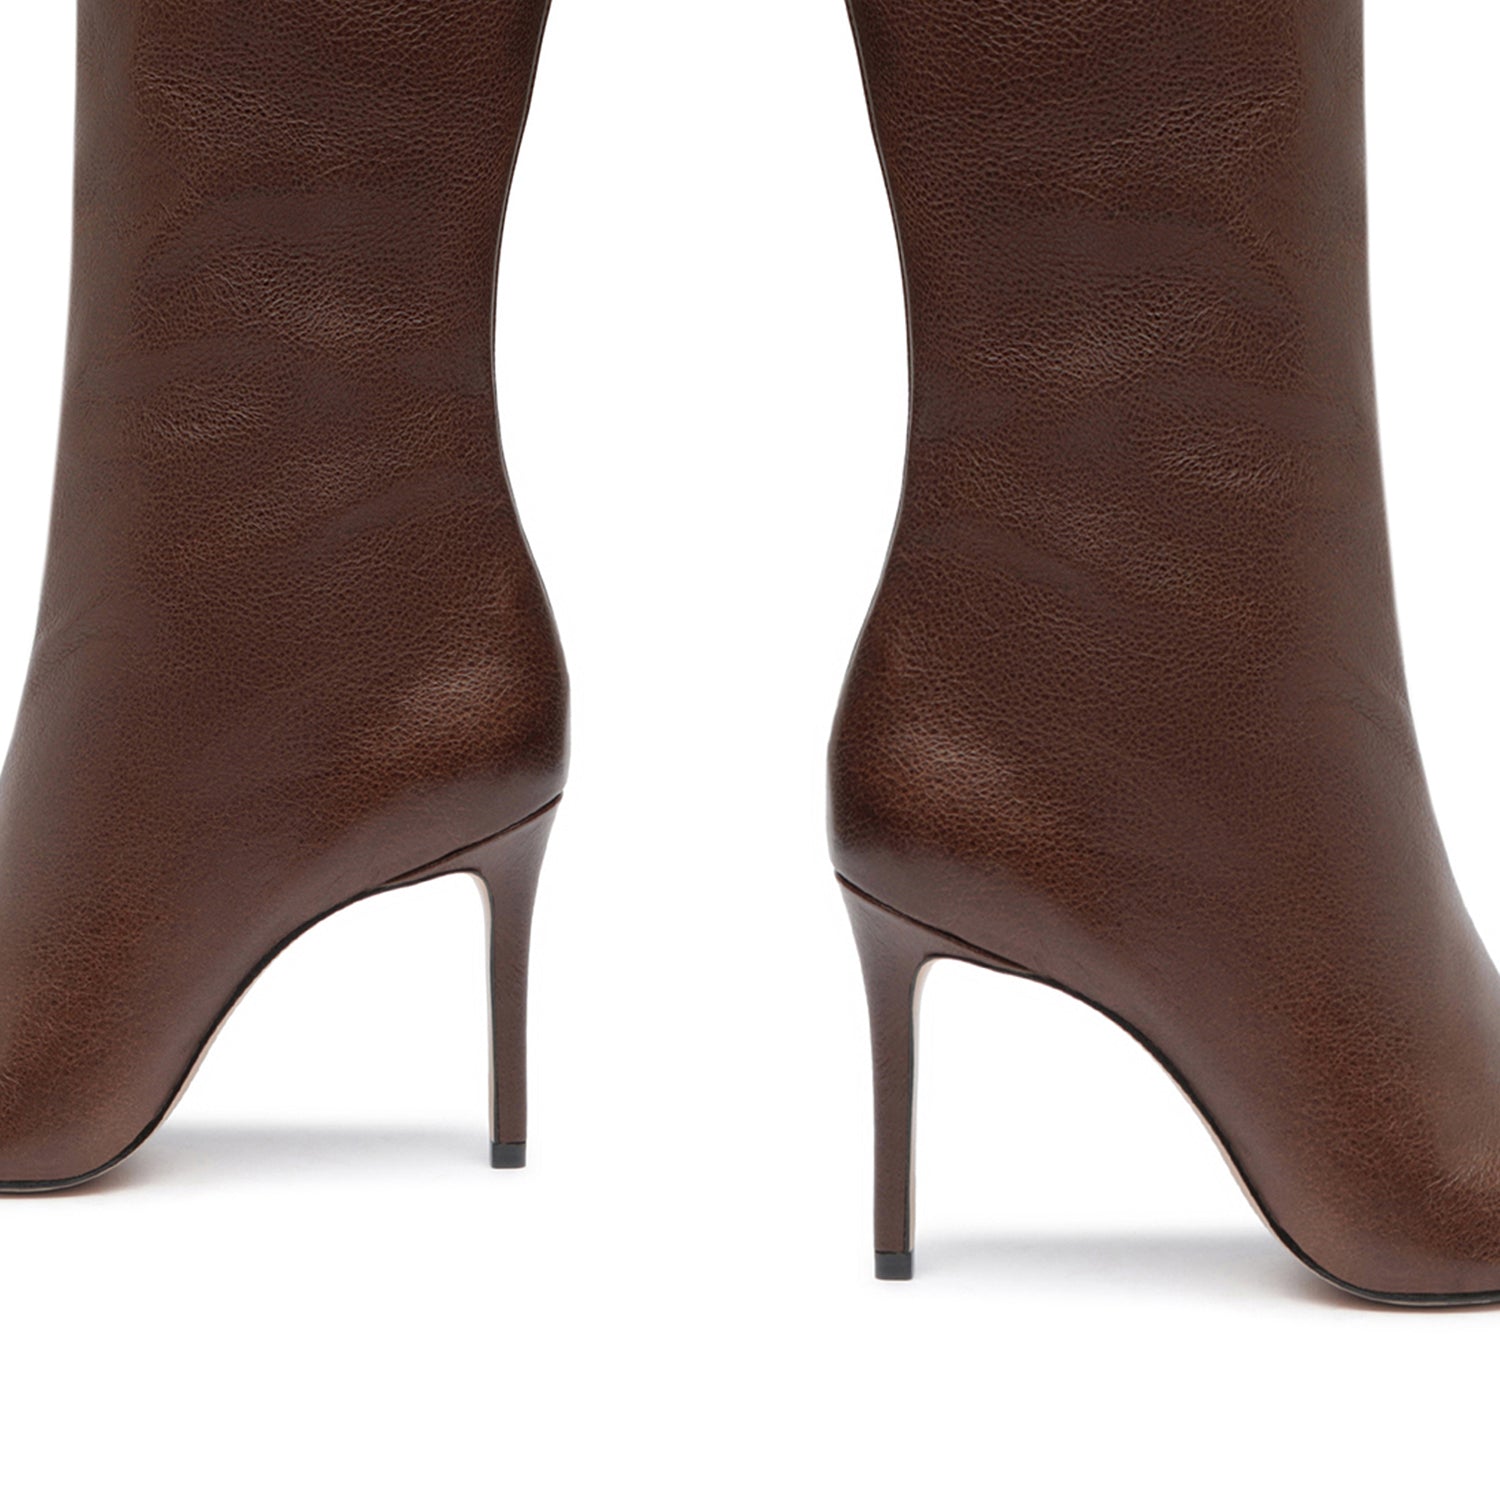 Maryana Leather Boot Brown Leather